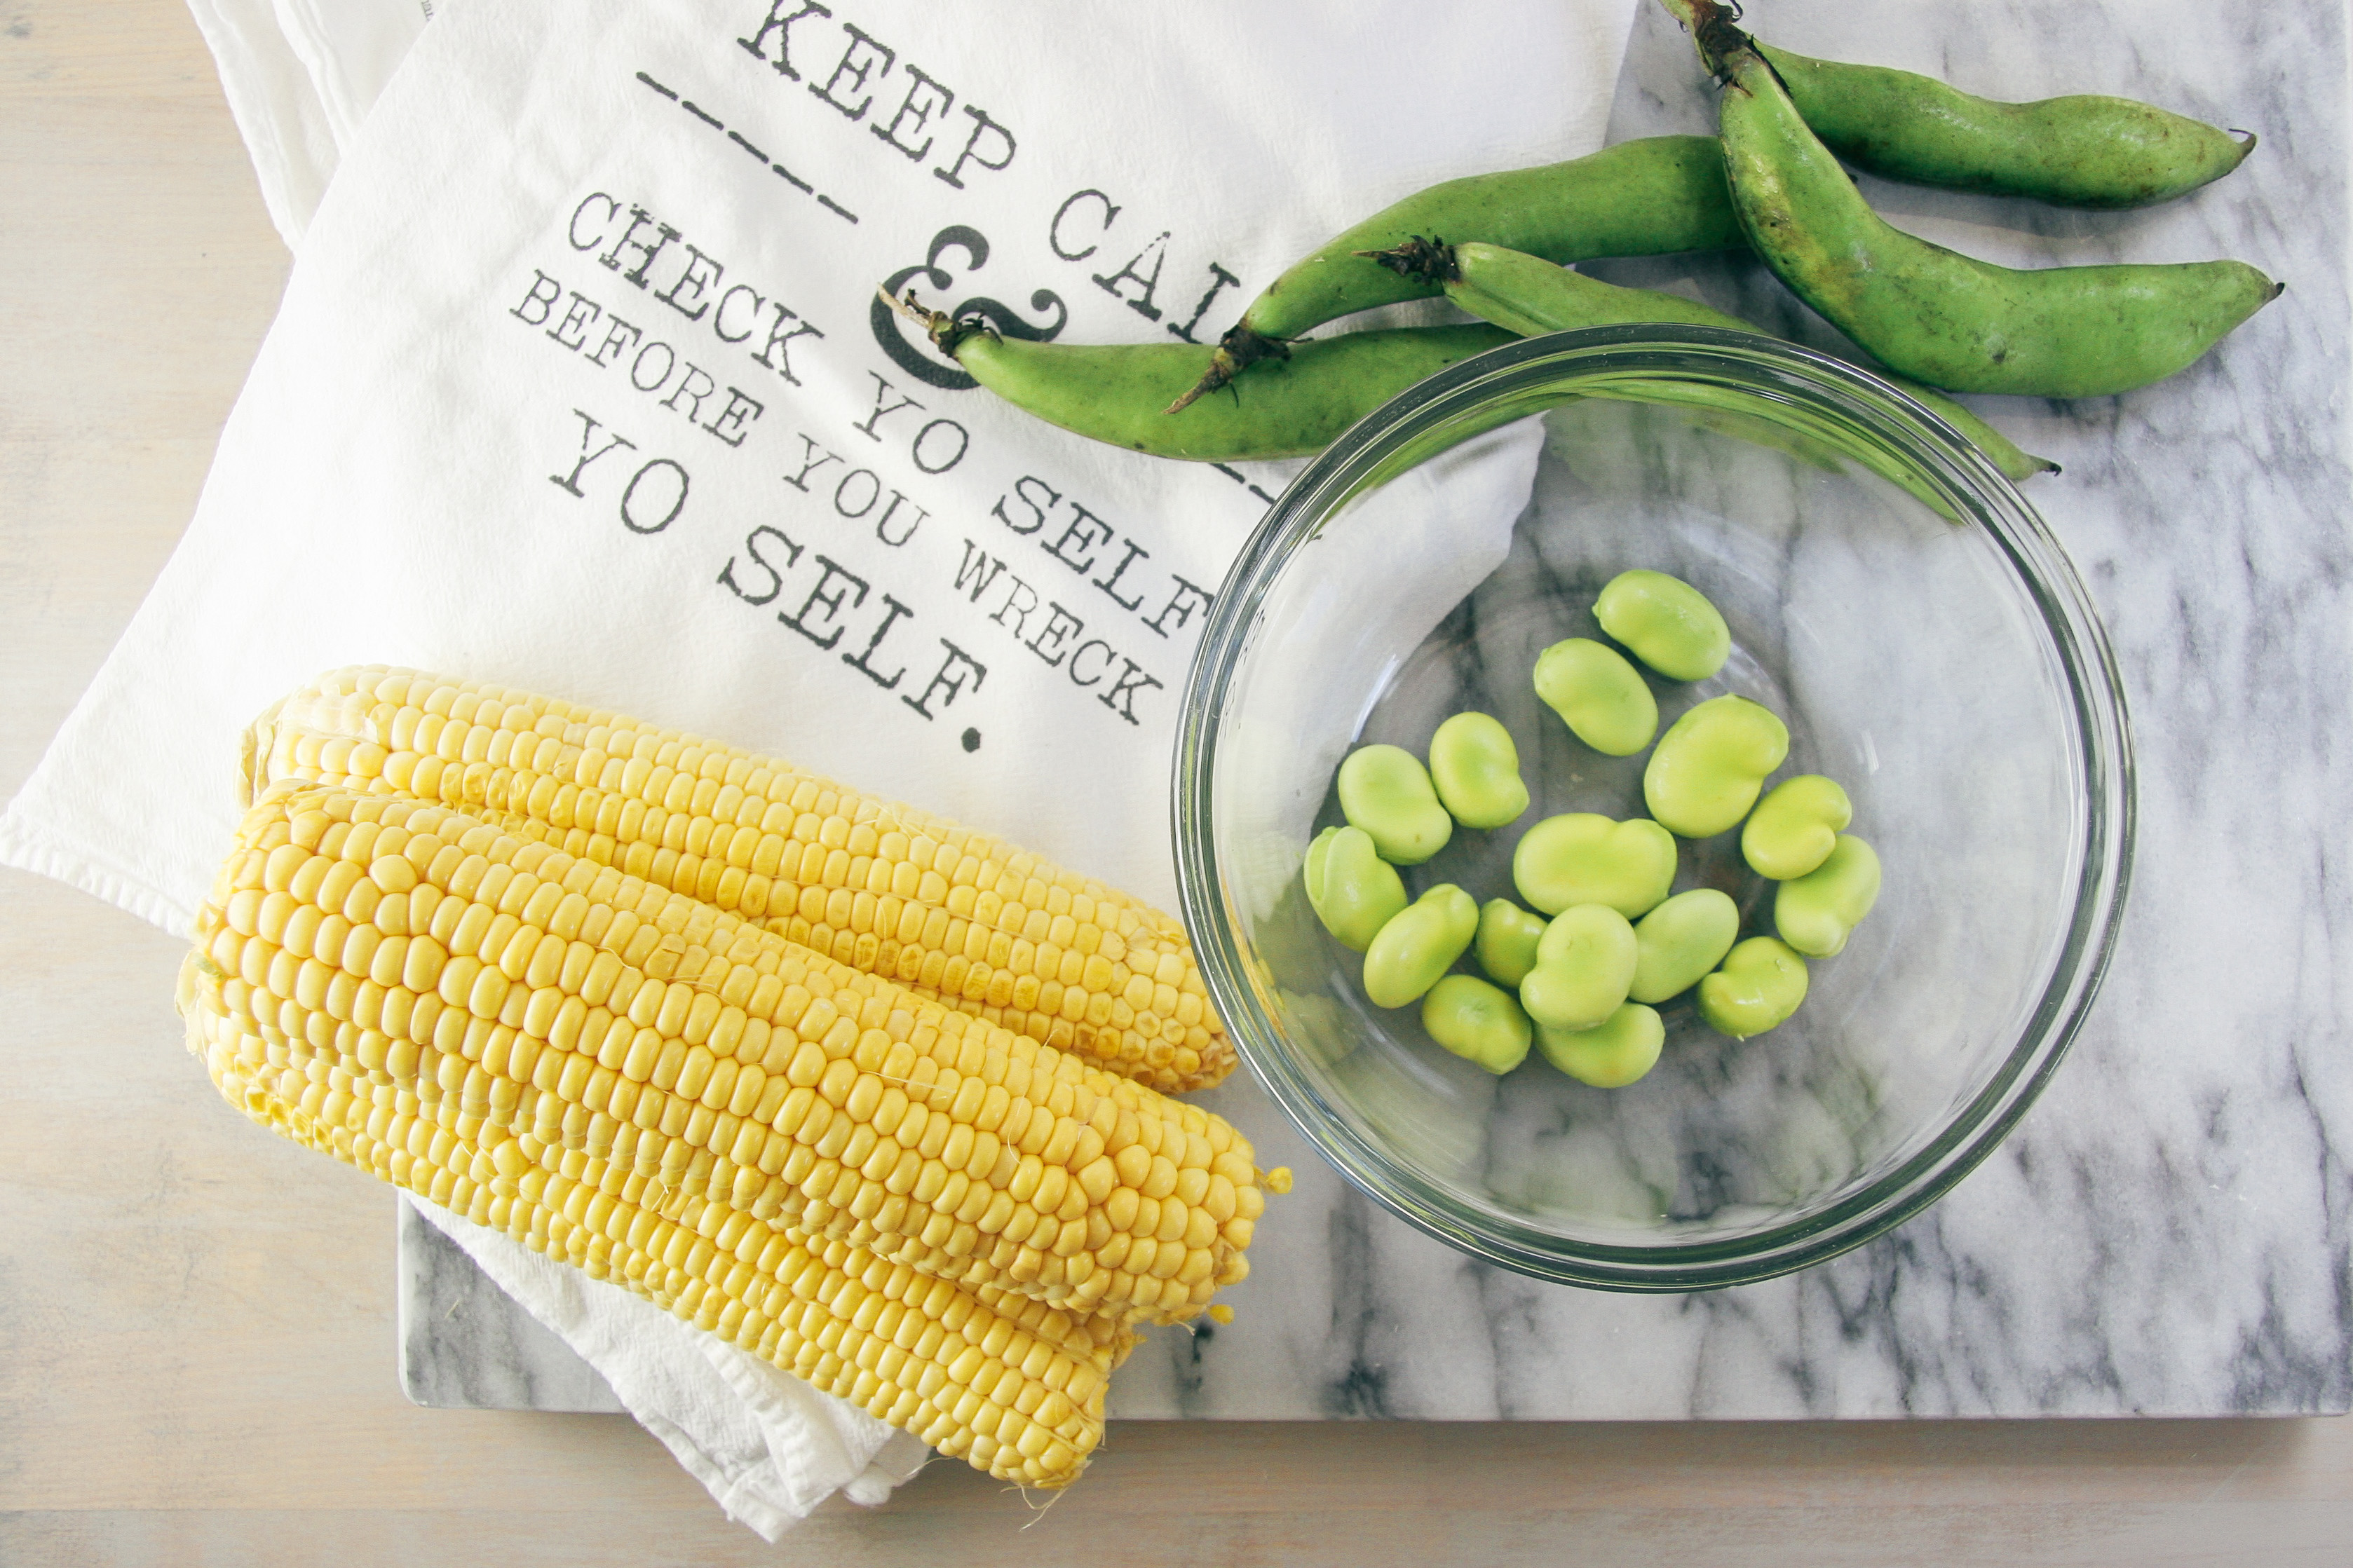 Sautéed Corn & Fava Beans with Parmesan | I Will Not Eat Oysters